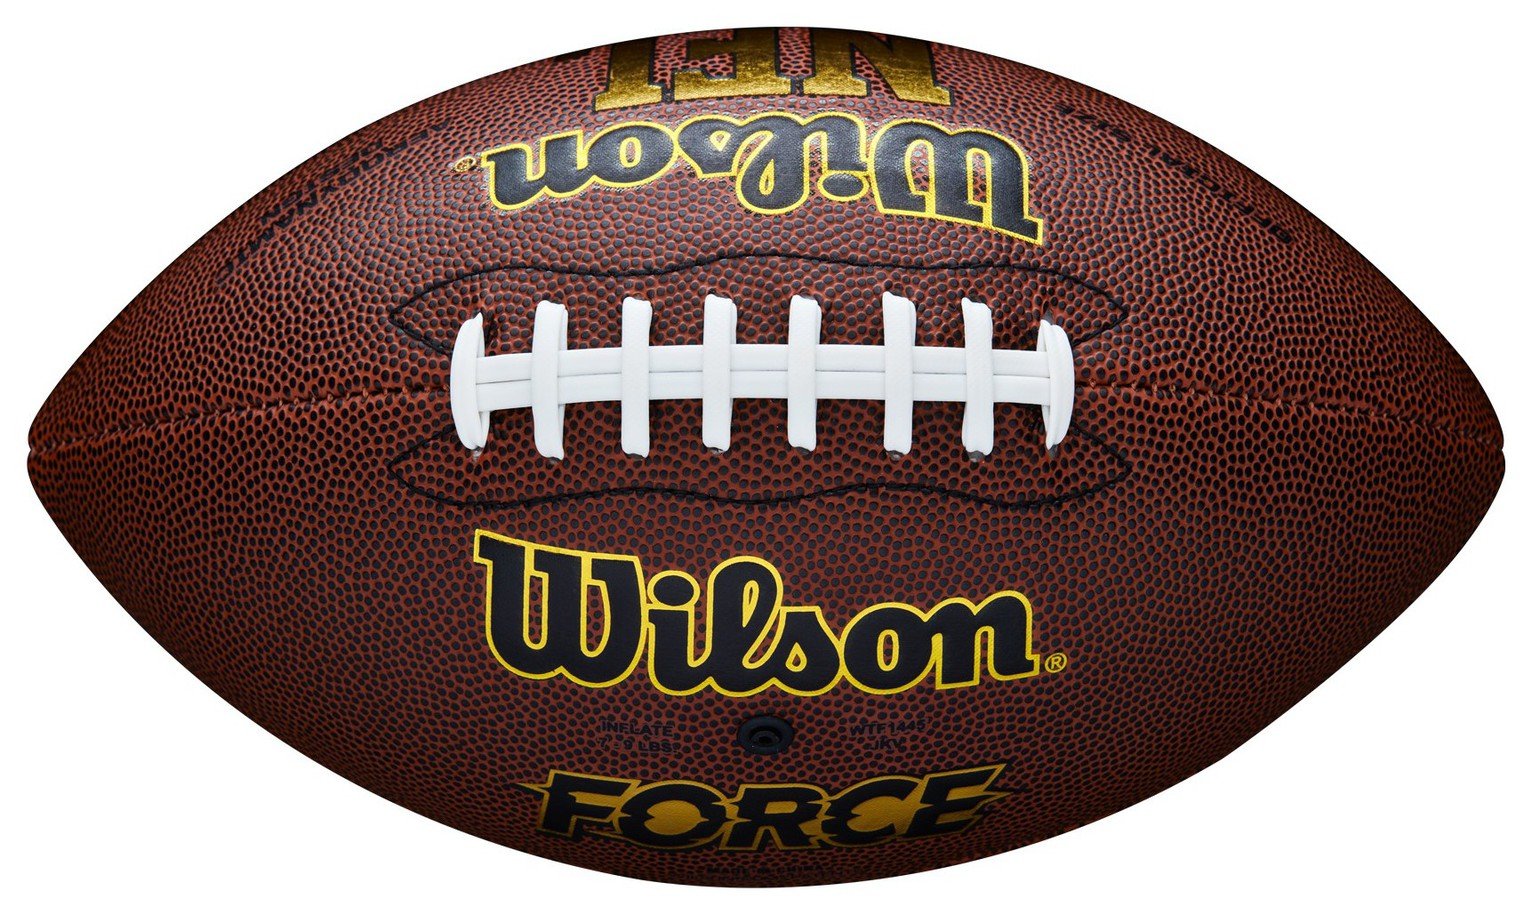 Wilson NFL Force American Football Review